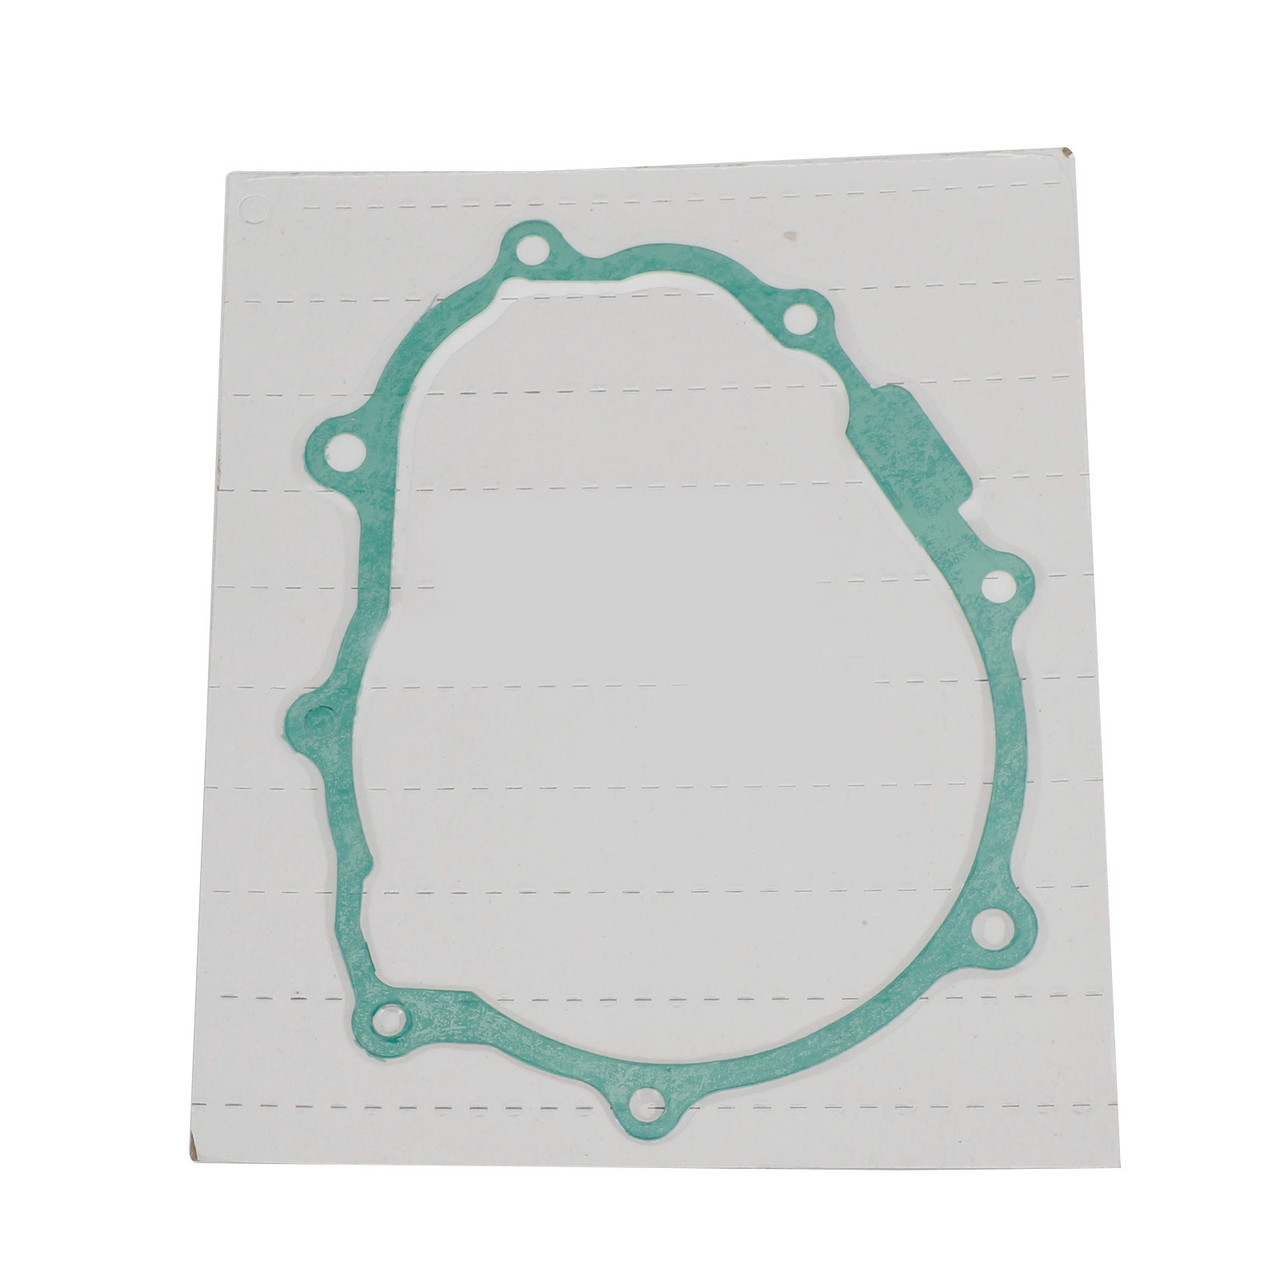 Left Generator Cover Gasket For Yamaha WR 250 F 03-14 Gas Gas EC 250 300 F 13-15